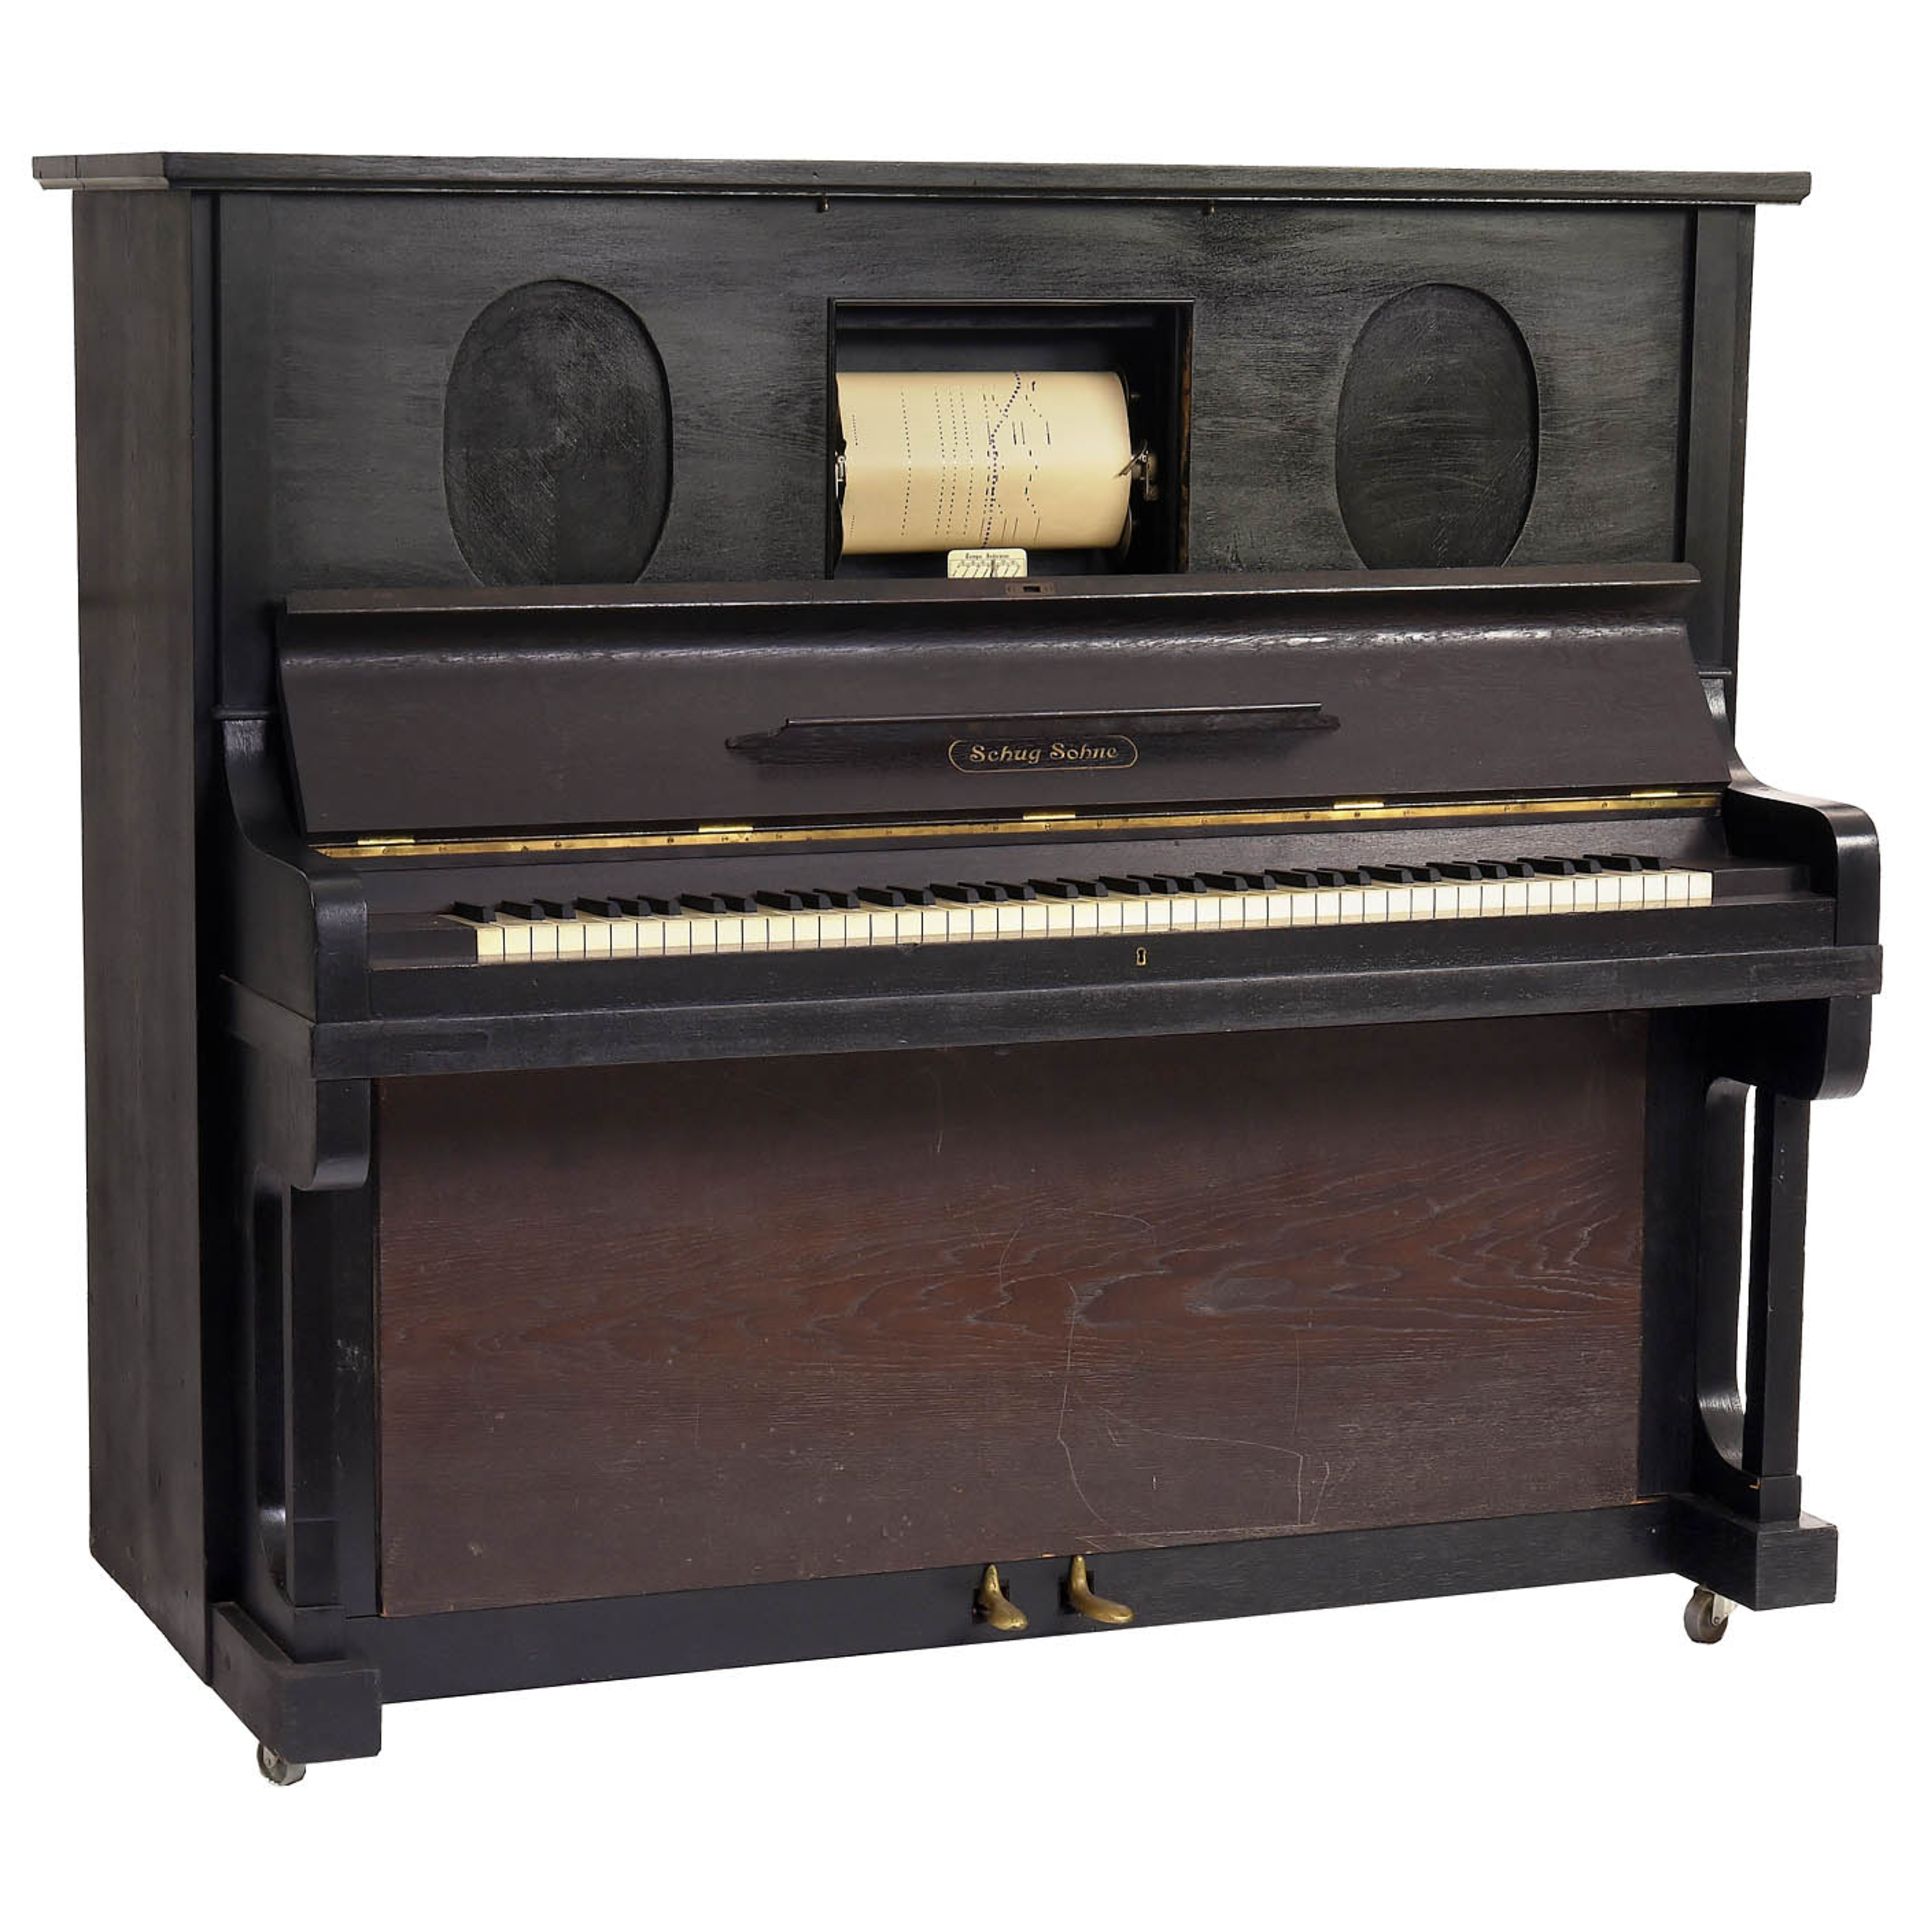 Electric Upright Piano, Piano Player and Music Rolls, c. 1920 - Image 2 of 5